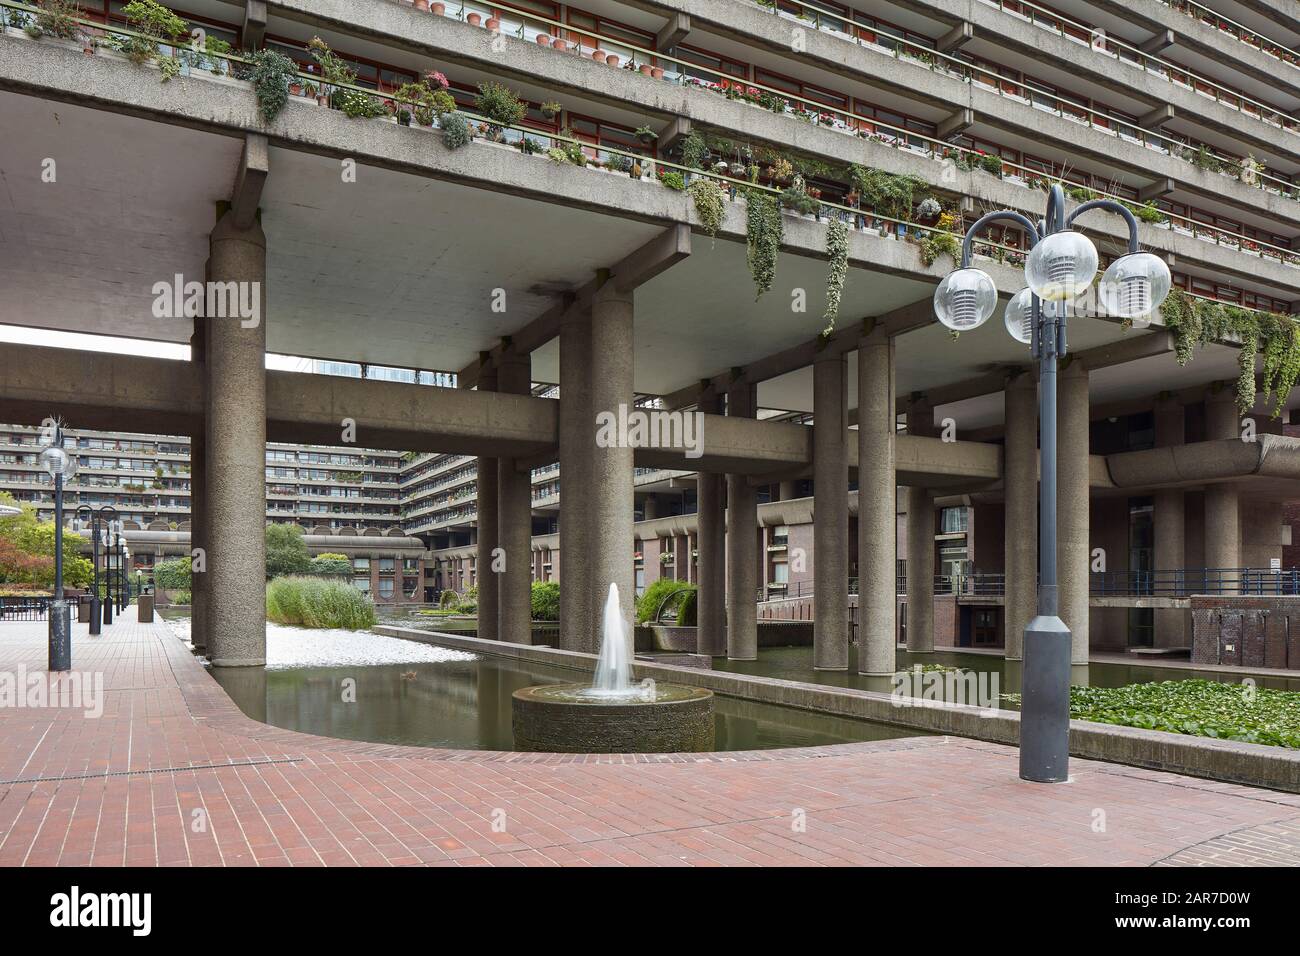 Courtyard with water features and passage ways. Barbican Estate, London, United Kingdom. Architect: Chamberlin, Powell and Bon, 1969. Stock Photo